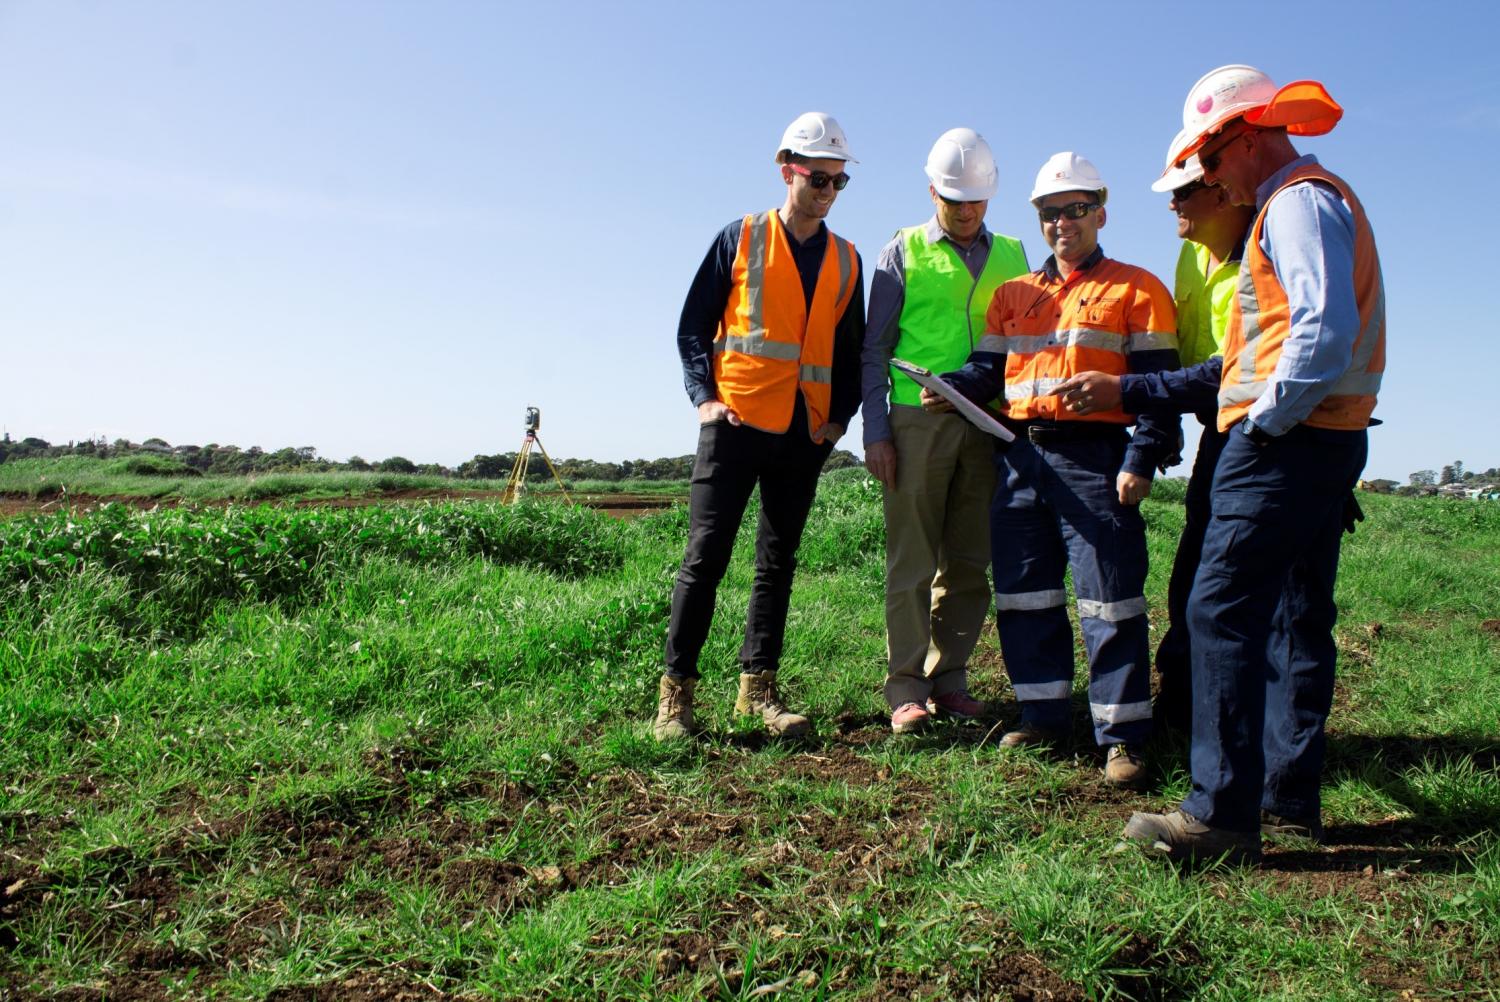 Cleary Bros construction expert team photo captured during the Marulan project